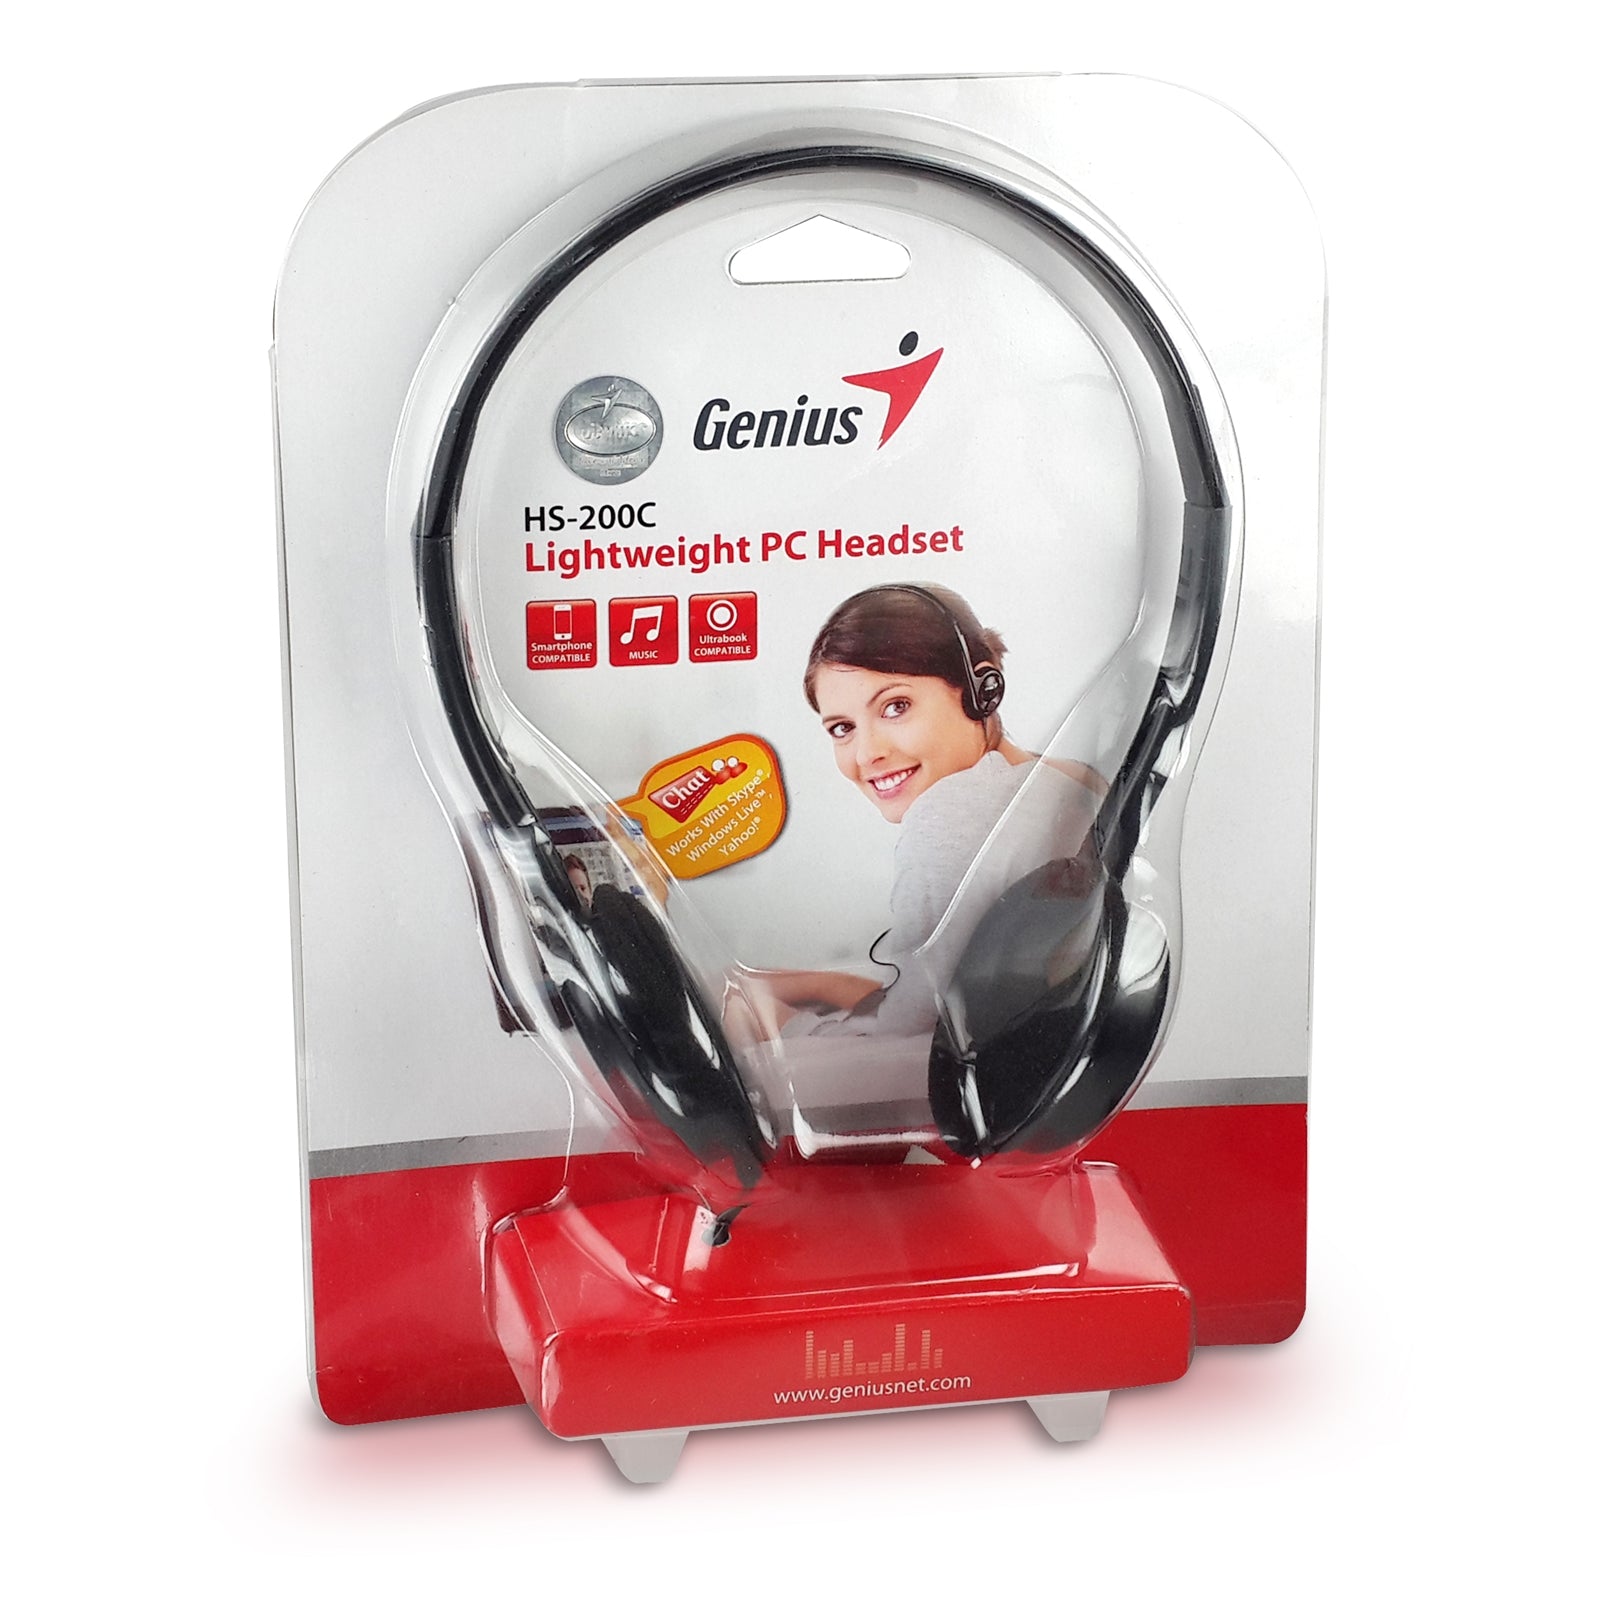 Genius HS-200C Lightweight PC Headset with microphone